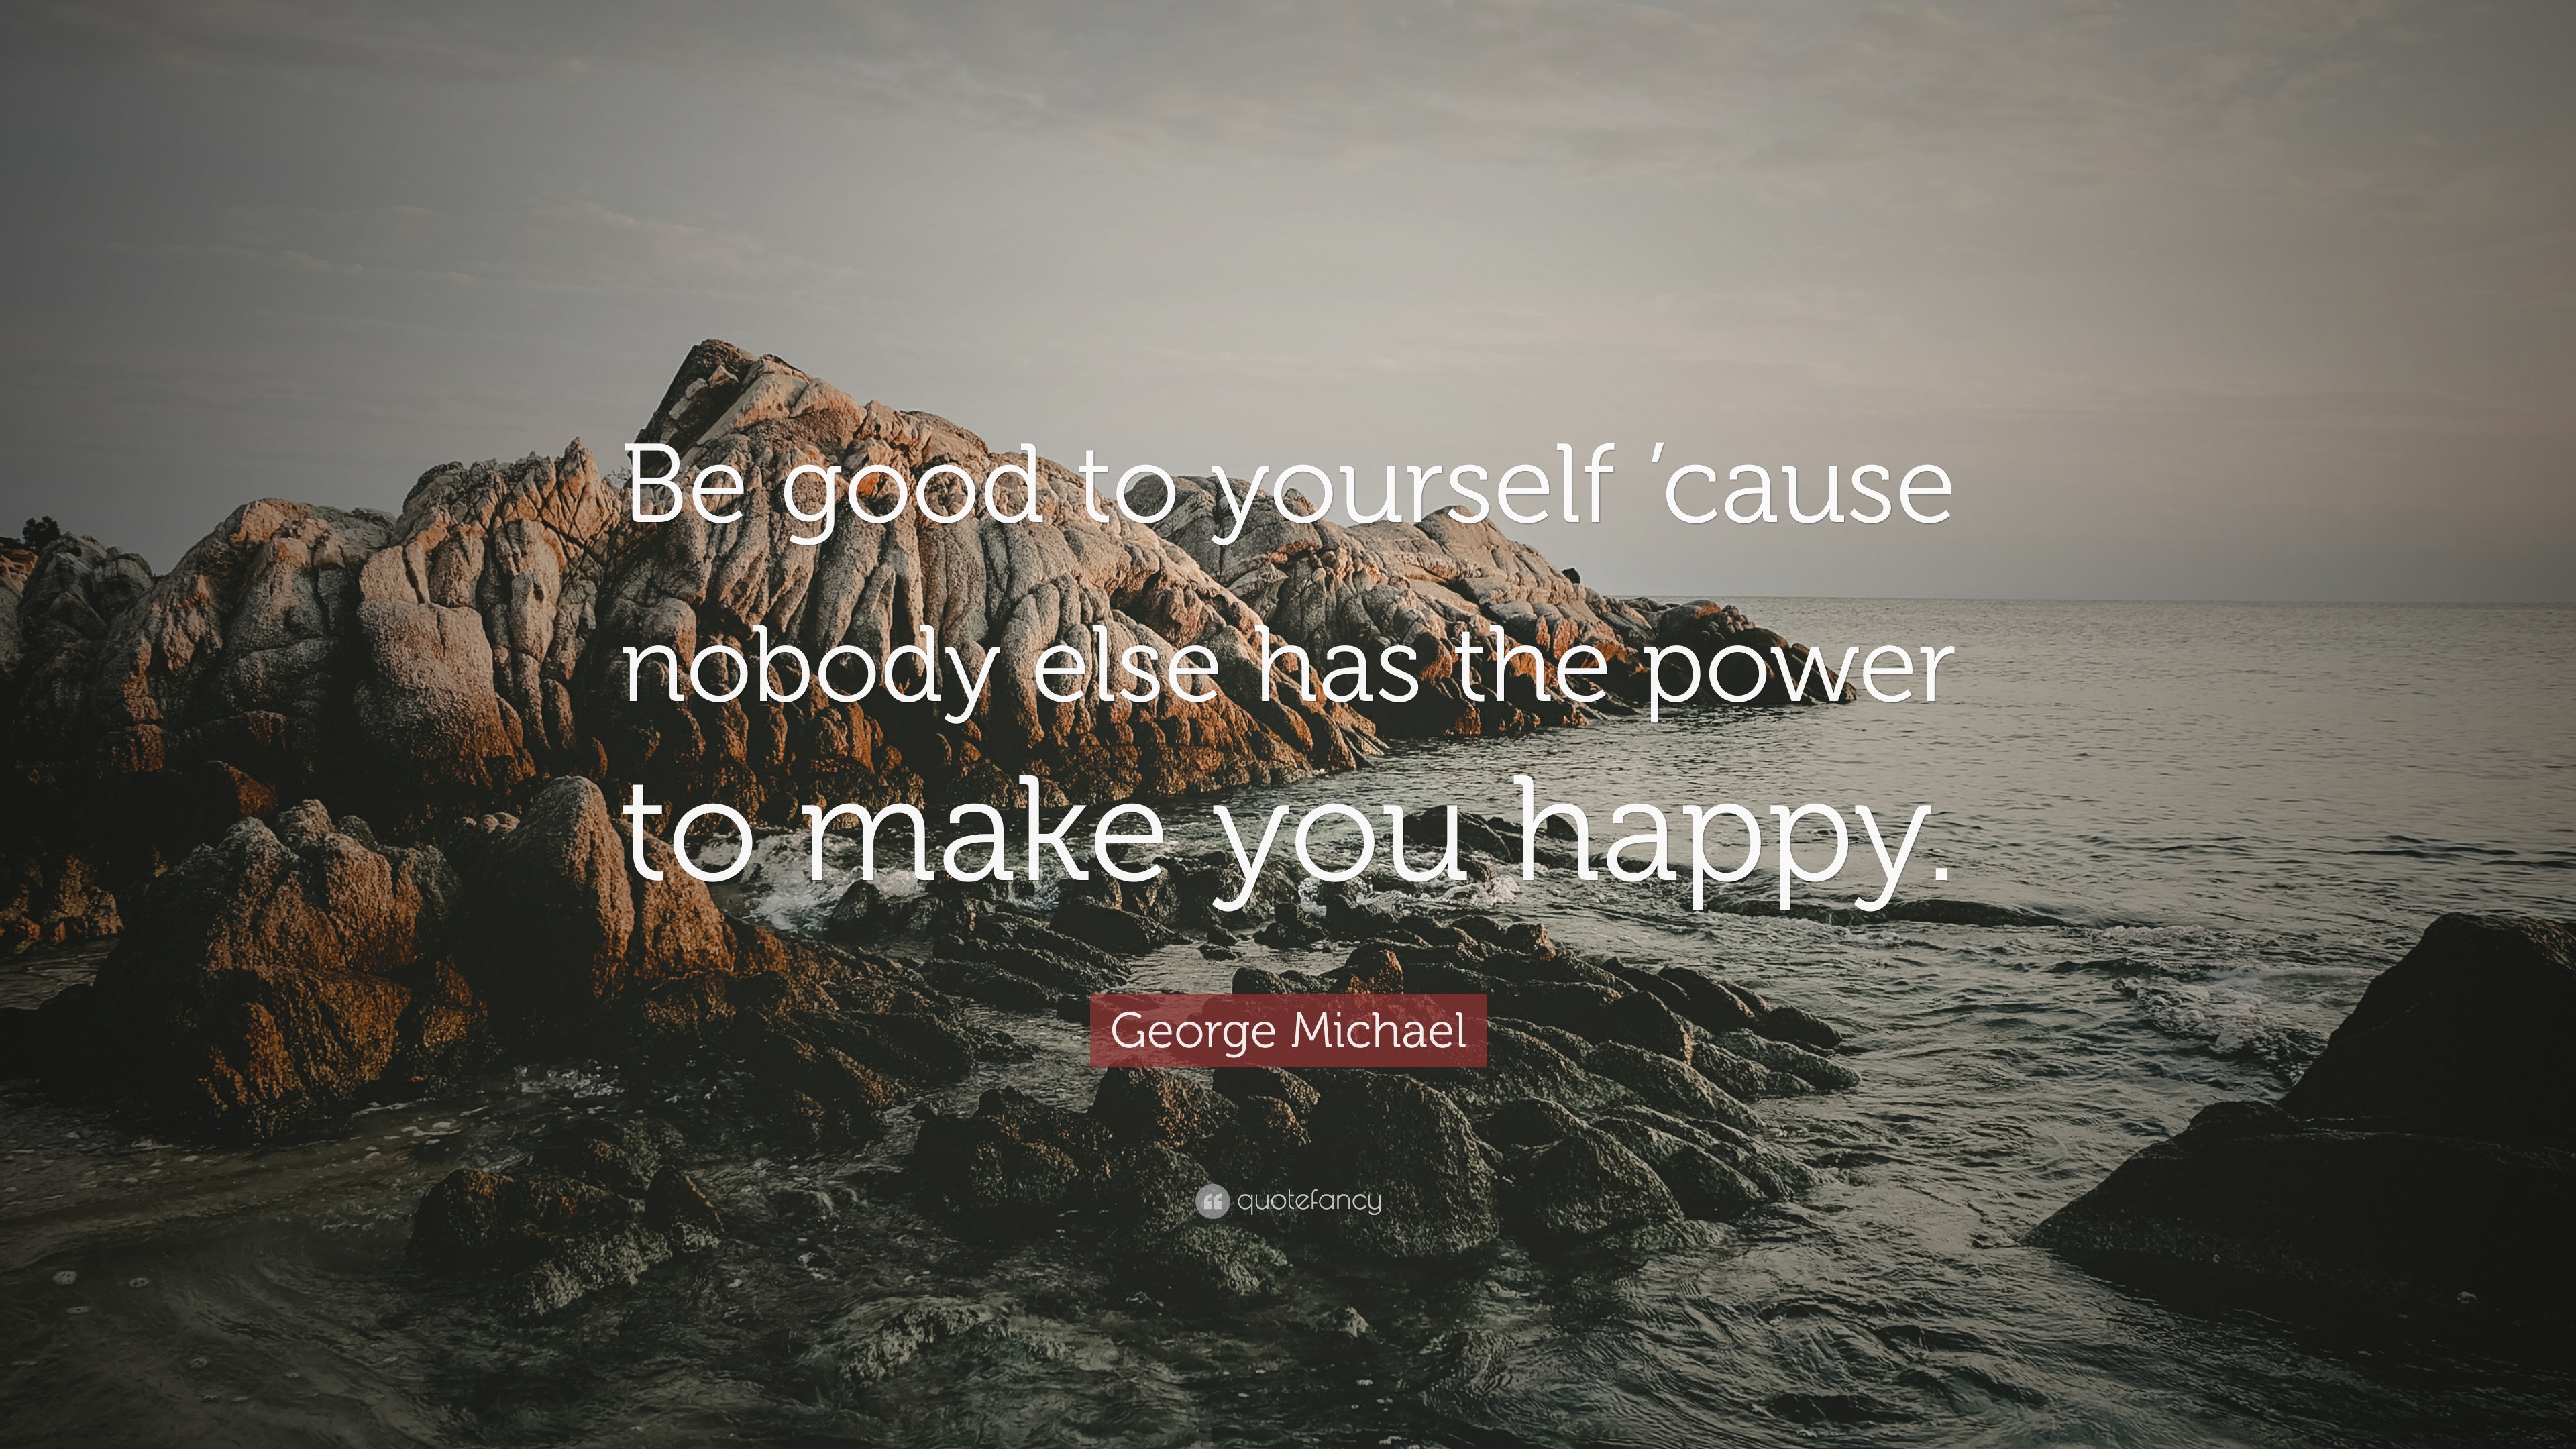 George Michael Quote: “Be good to yourself ’cause nobody else has the